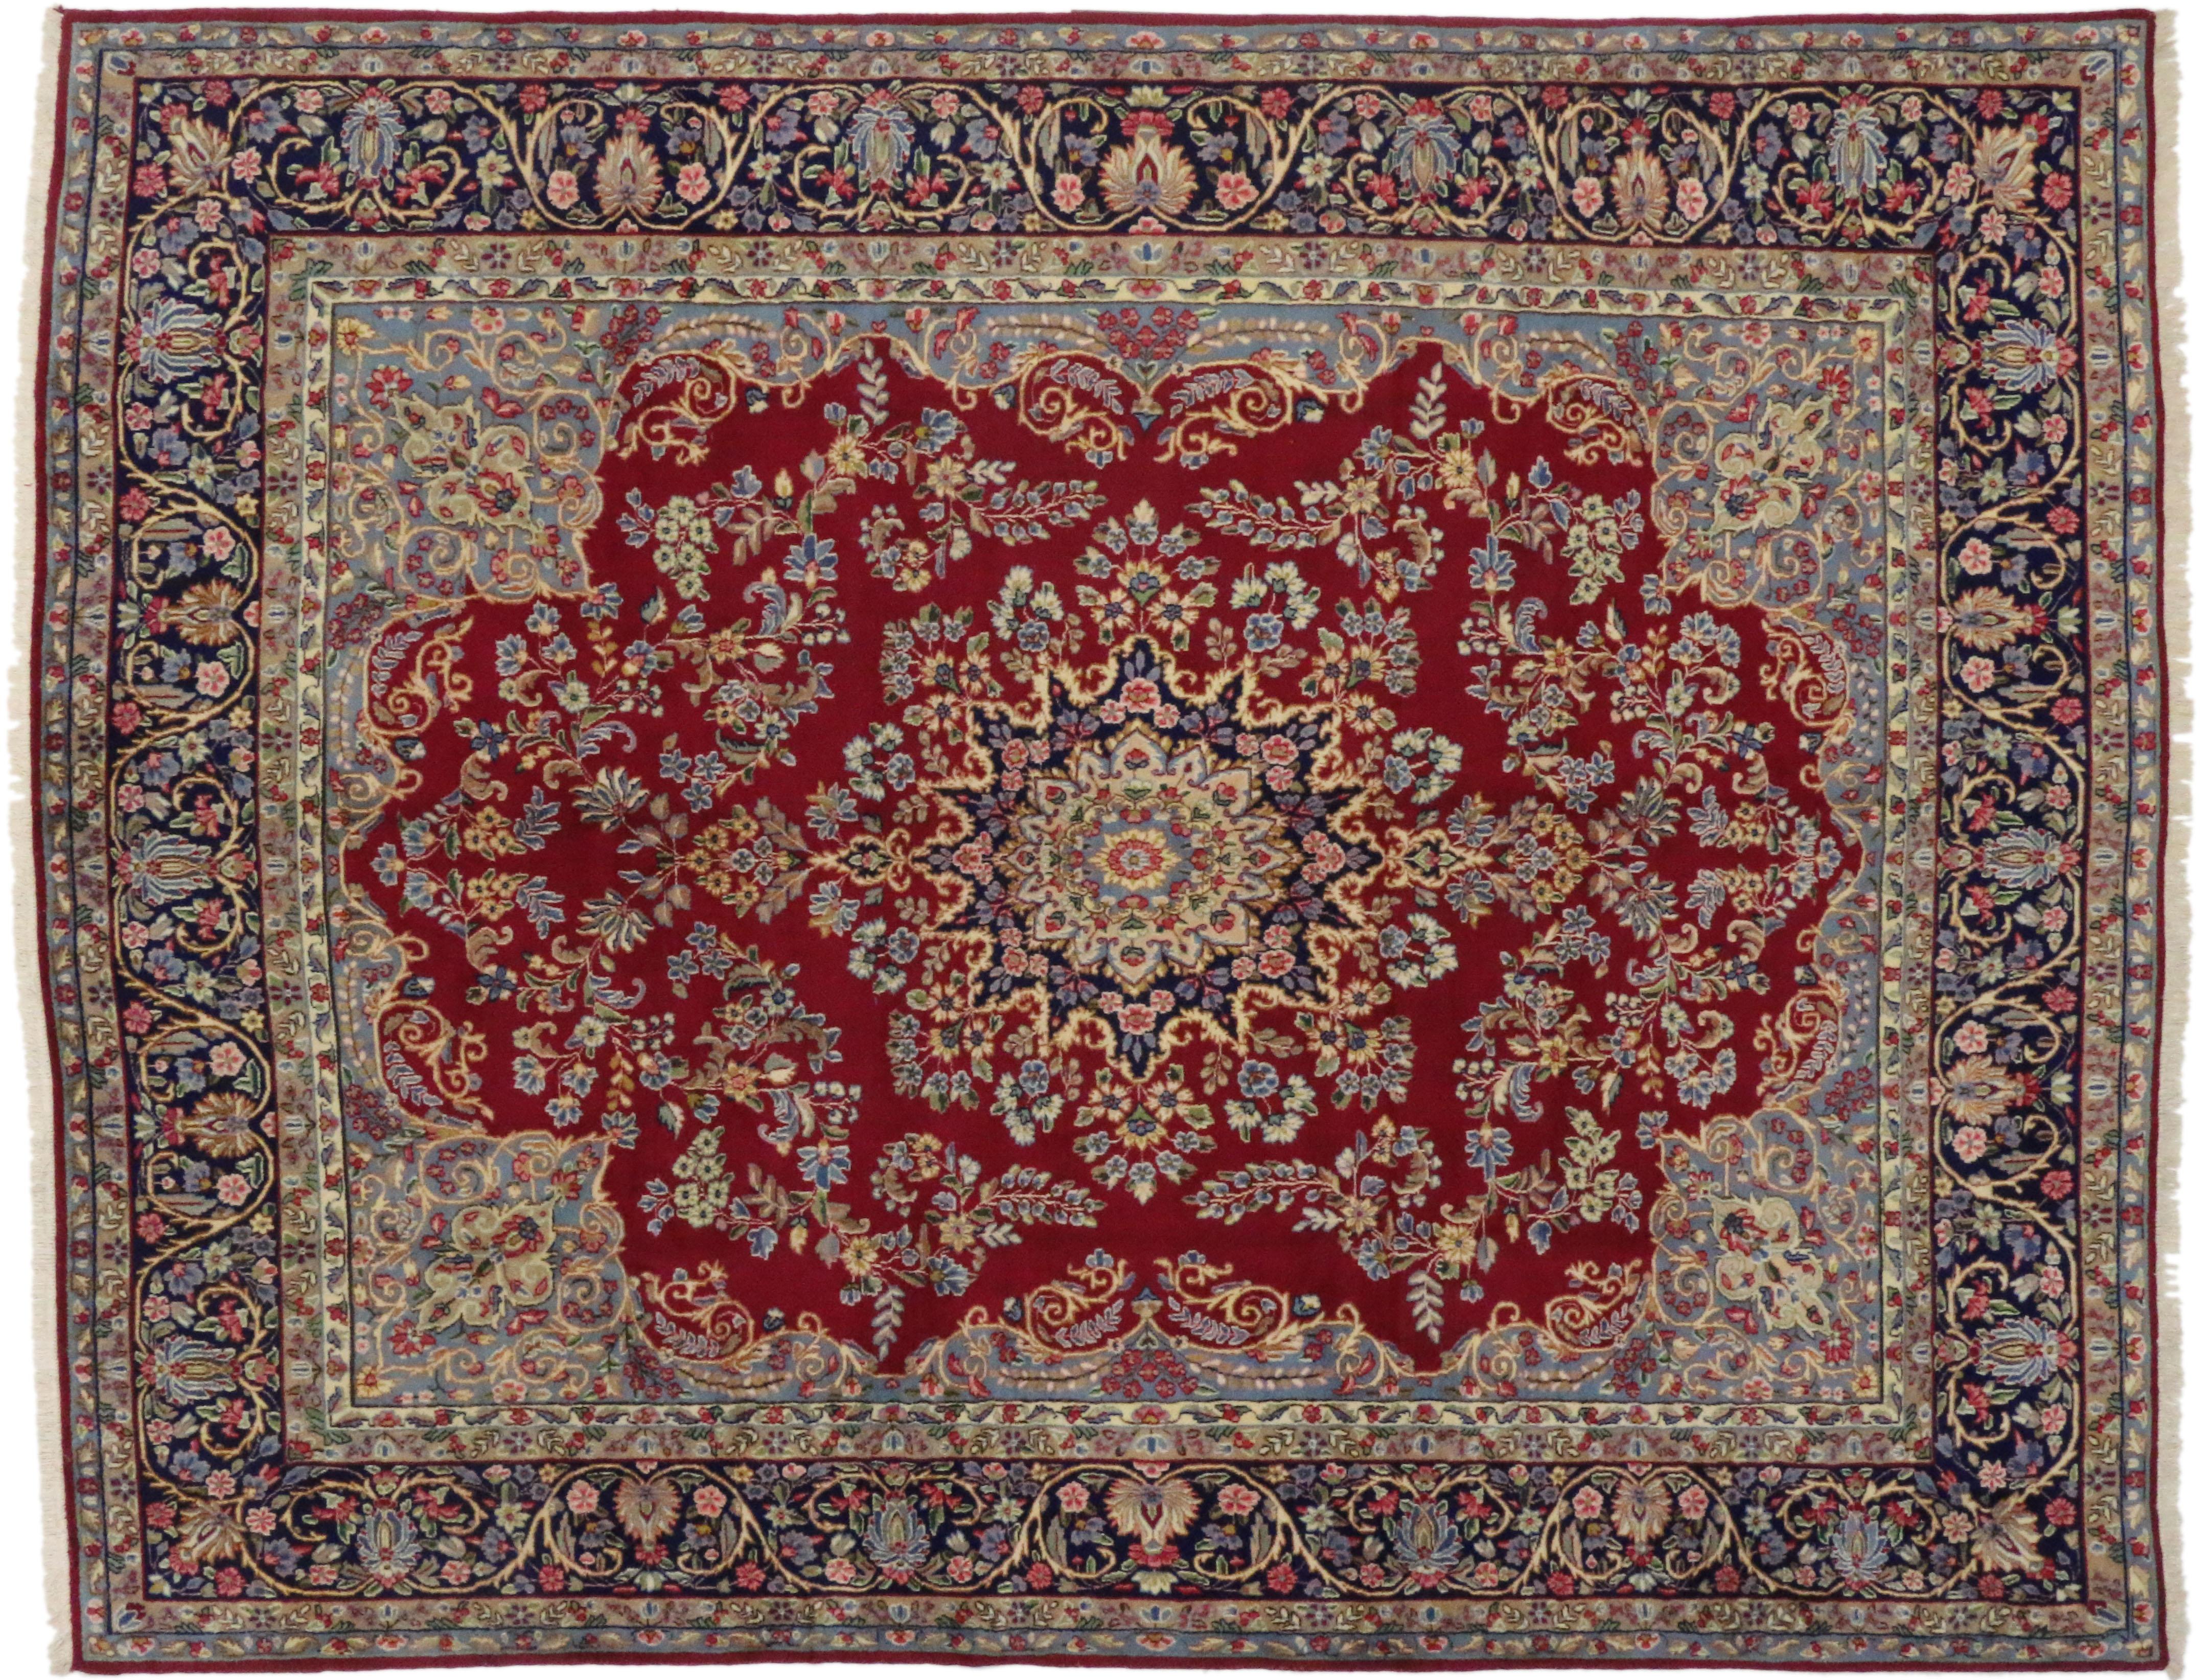 20th Century Vintage Persian Kerman Rug with Old World French Victorian Style, Kirman Rug For Sale